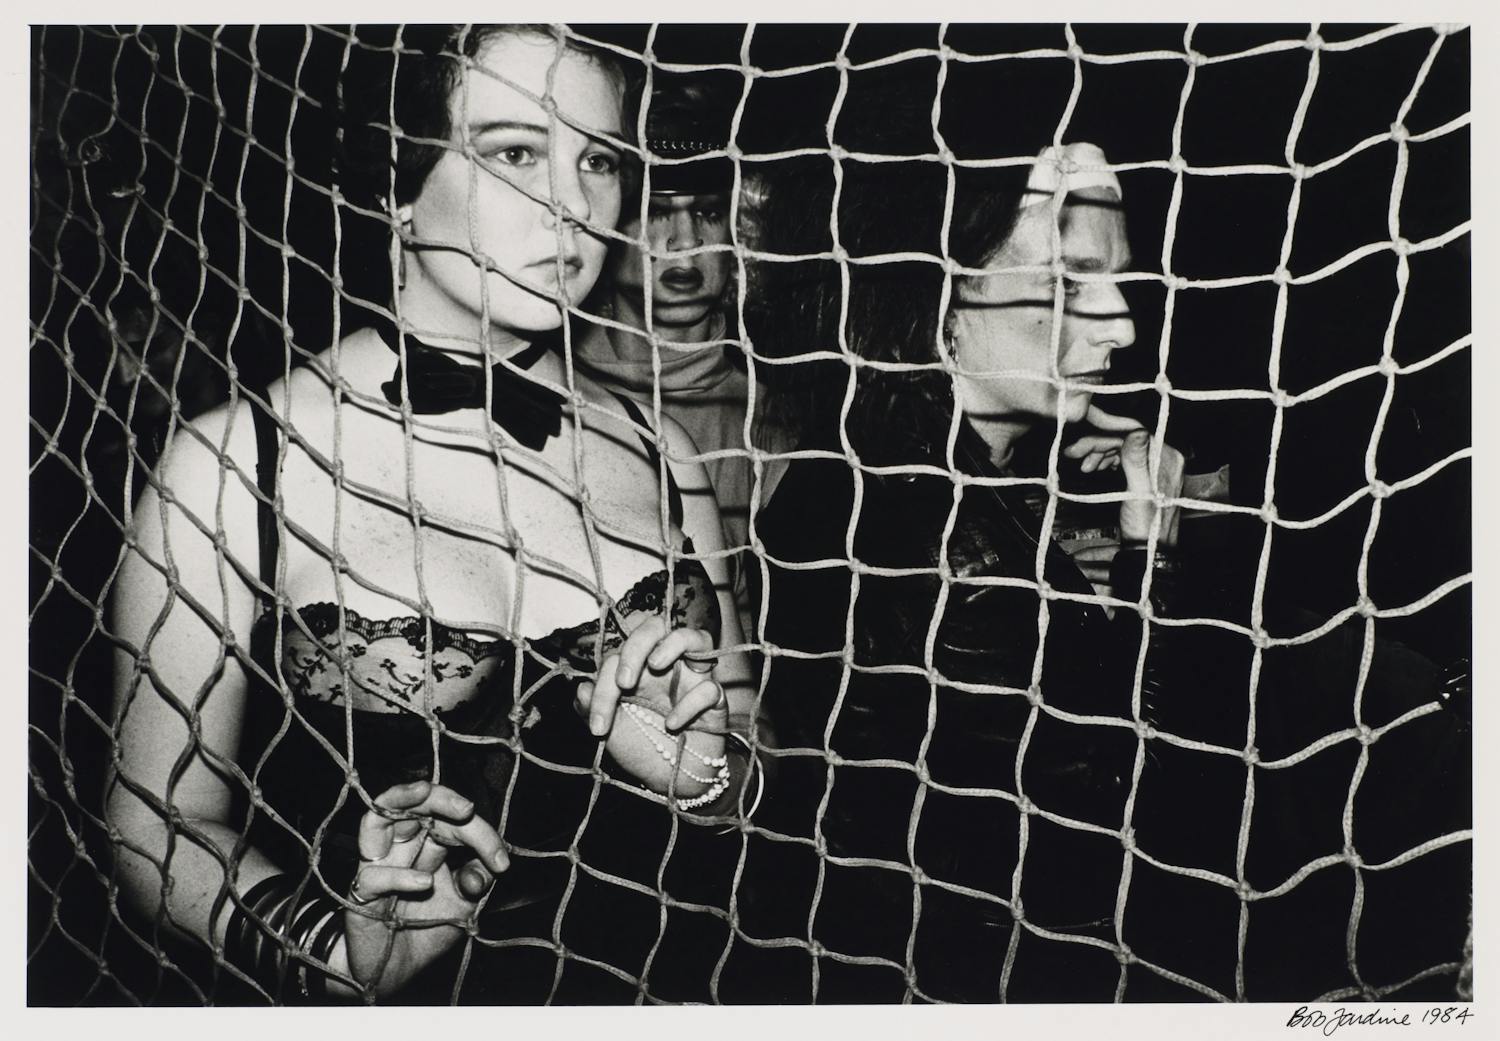 [ID: The black and white photograph shows a person standing in the foreground behind a net. They are wearing a bow-tie and a corset, and their hands are gripping the net. Behind them there are two other people, their faces barely visible as they emerge from the dark background. End of ID]